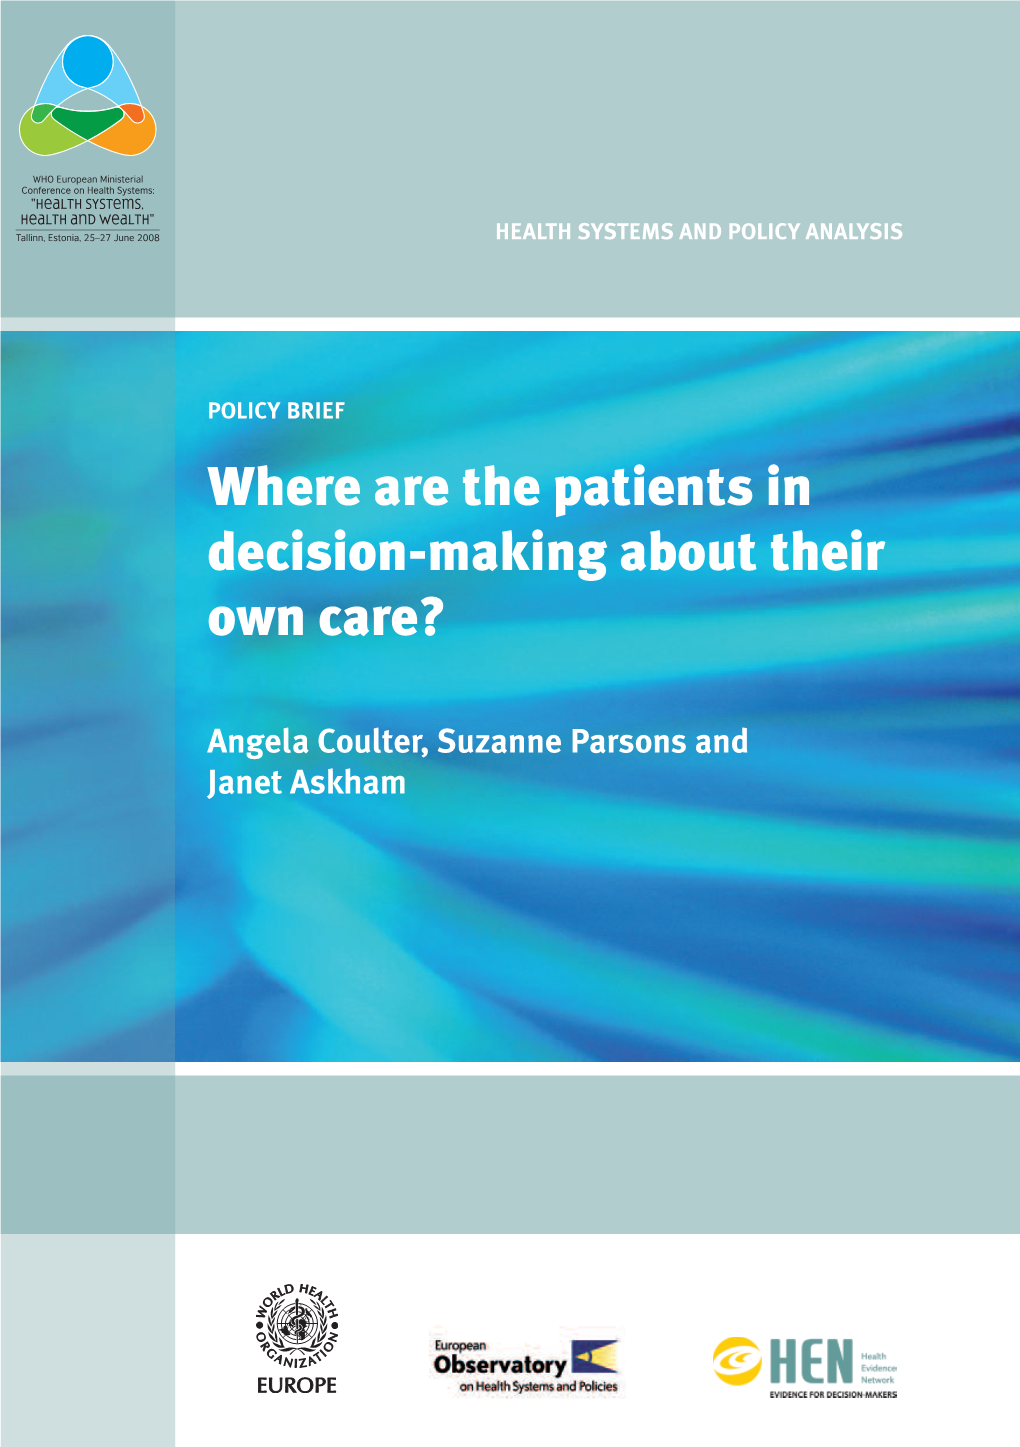 WHO: Where Are the Patients in Decision-Making About Their Care?